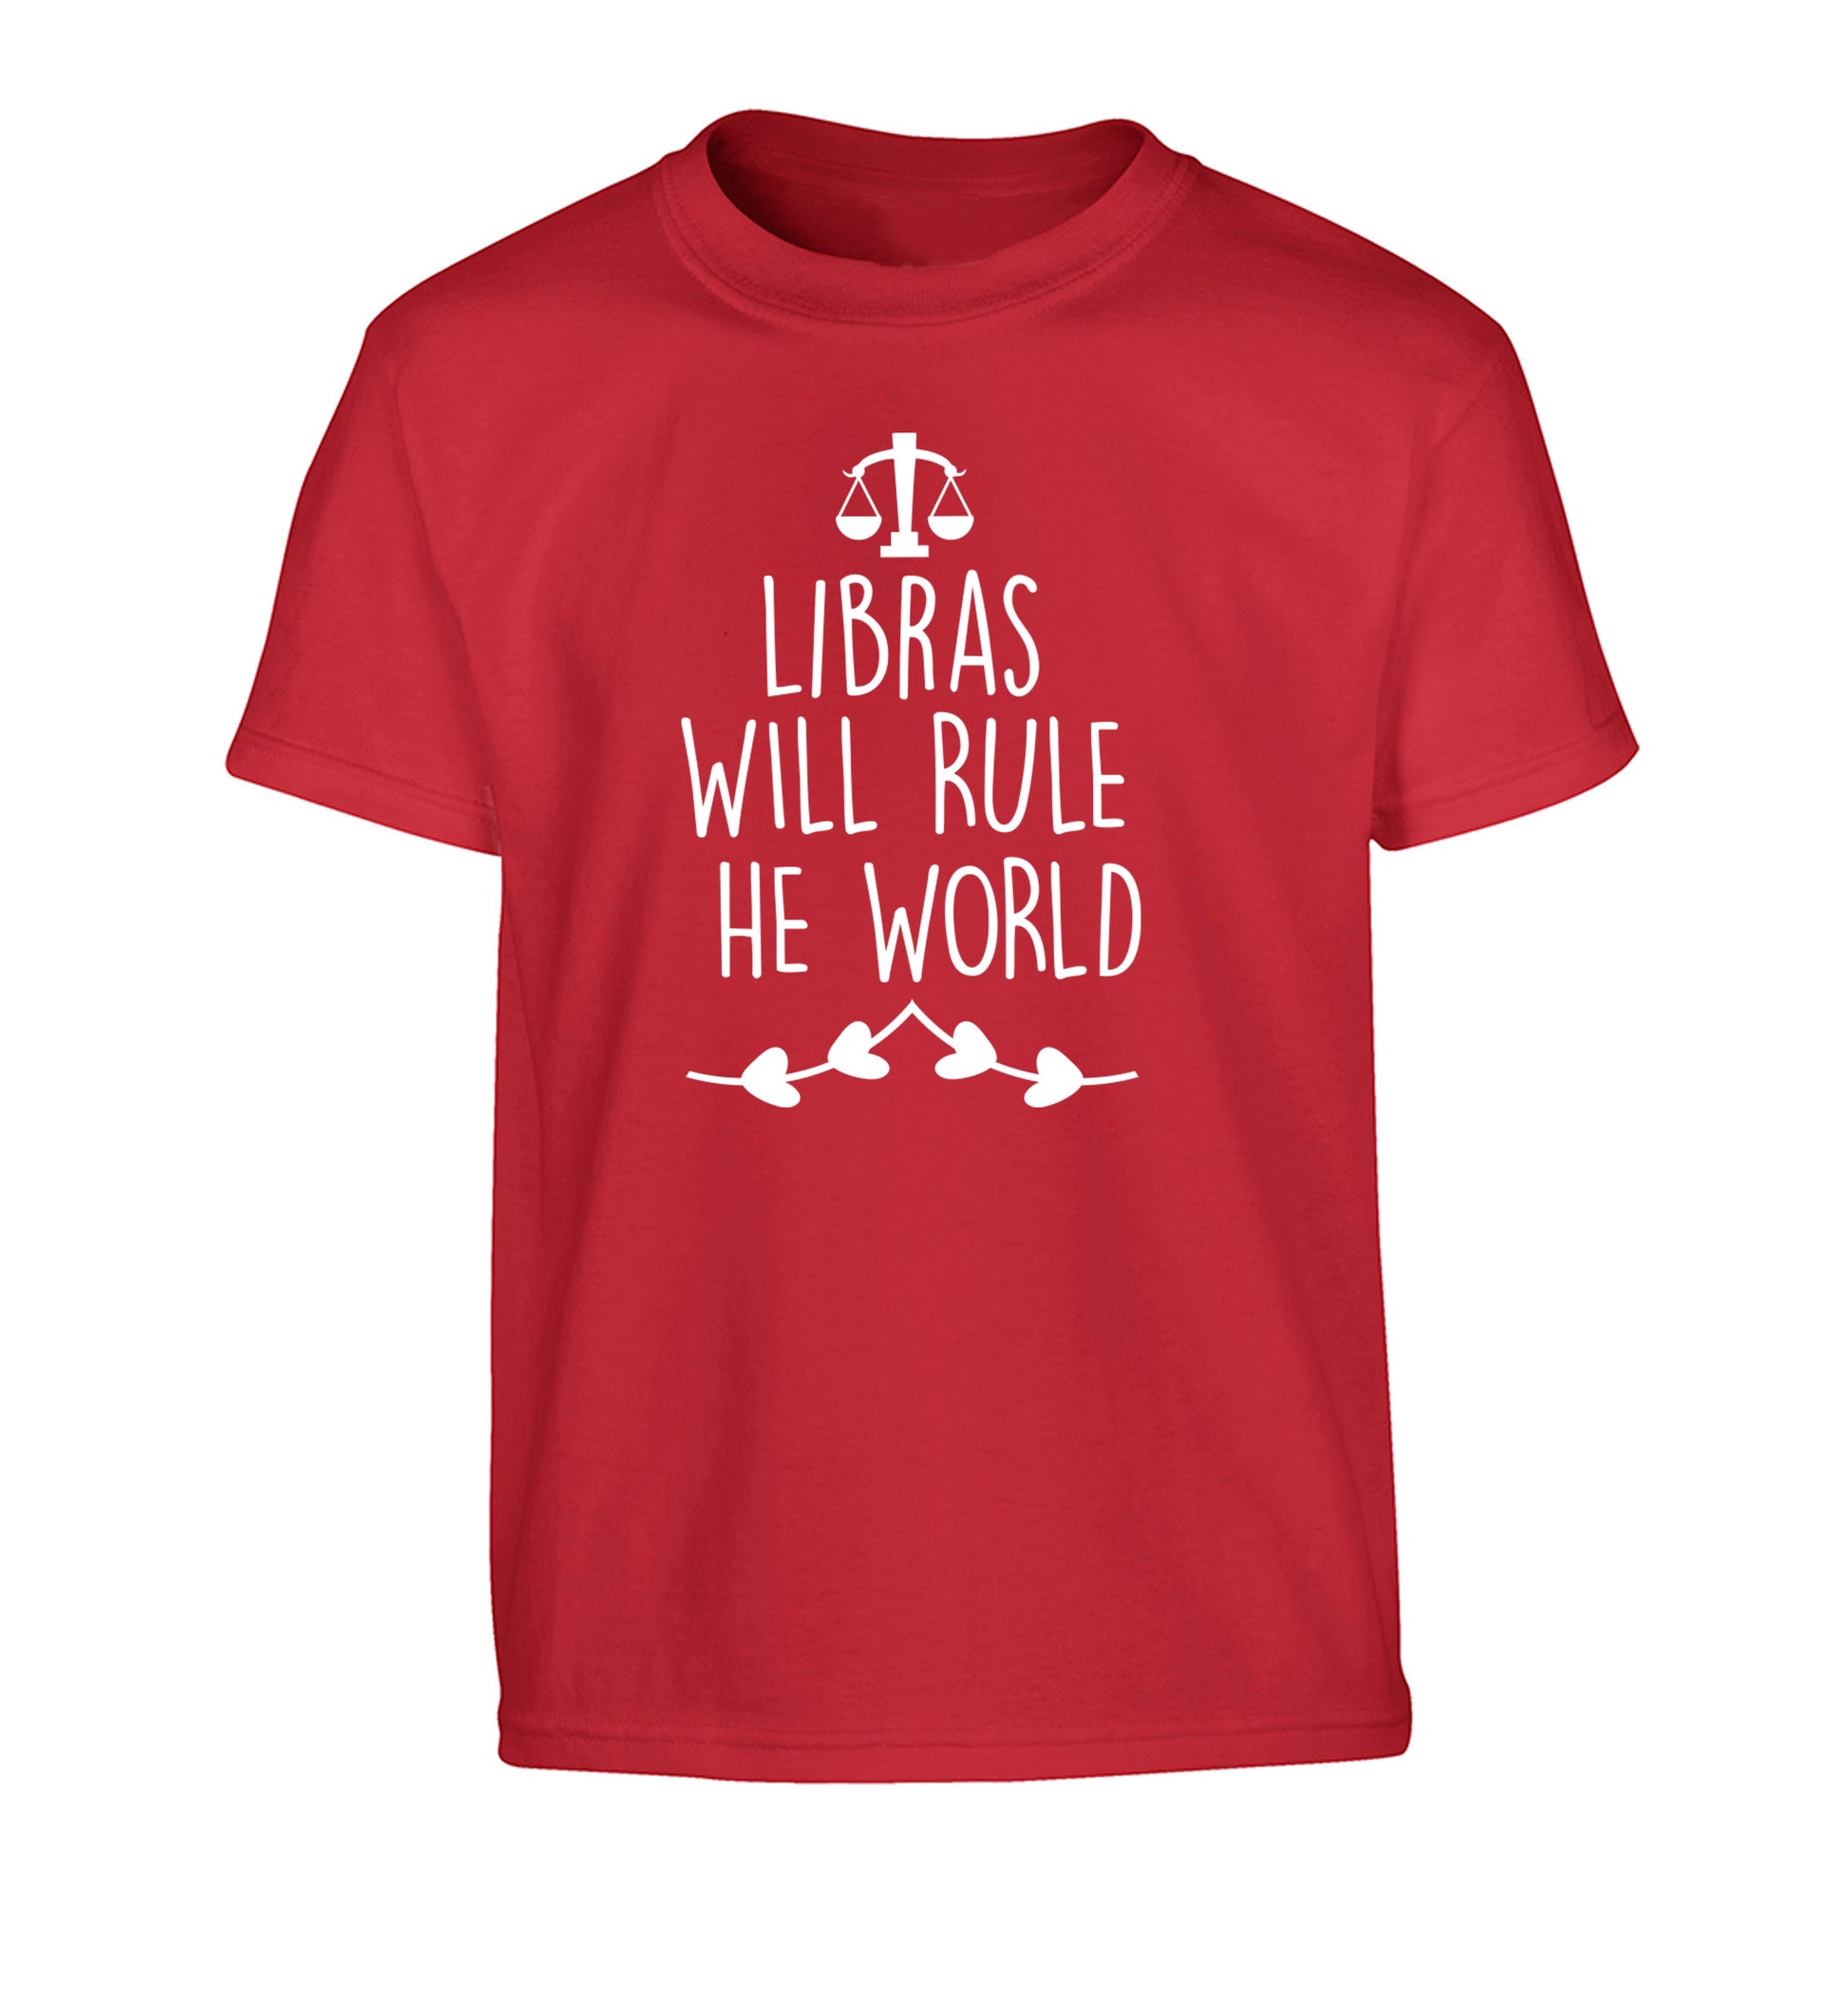 Libras will rule the world Children's red Tshirt 12-13 Years